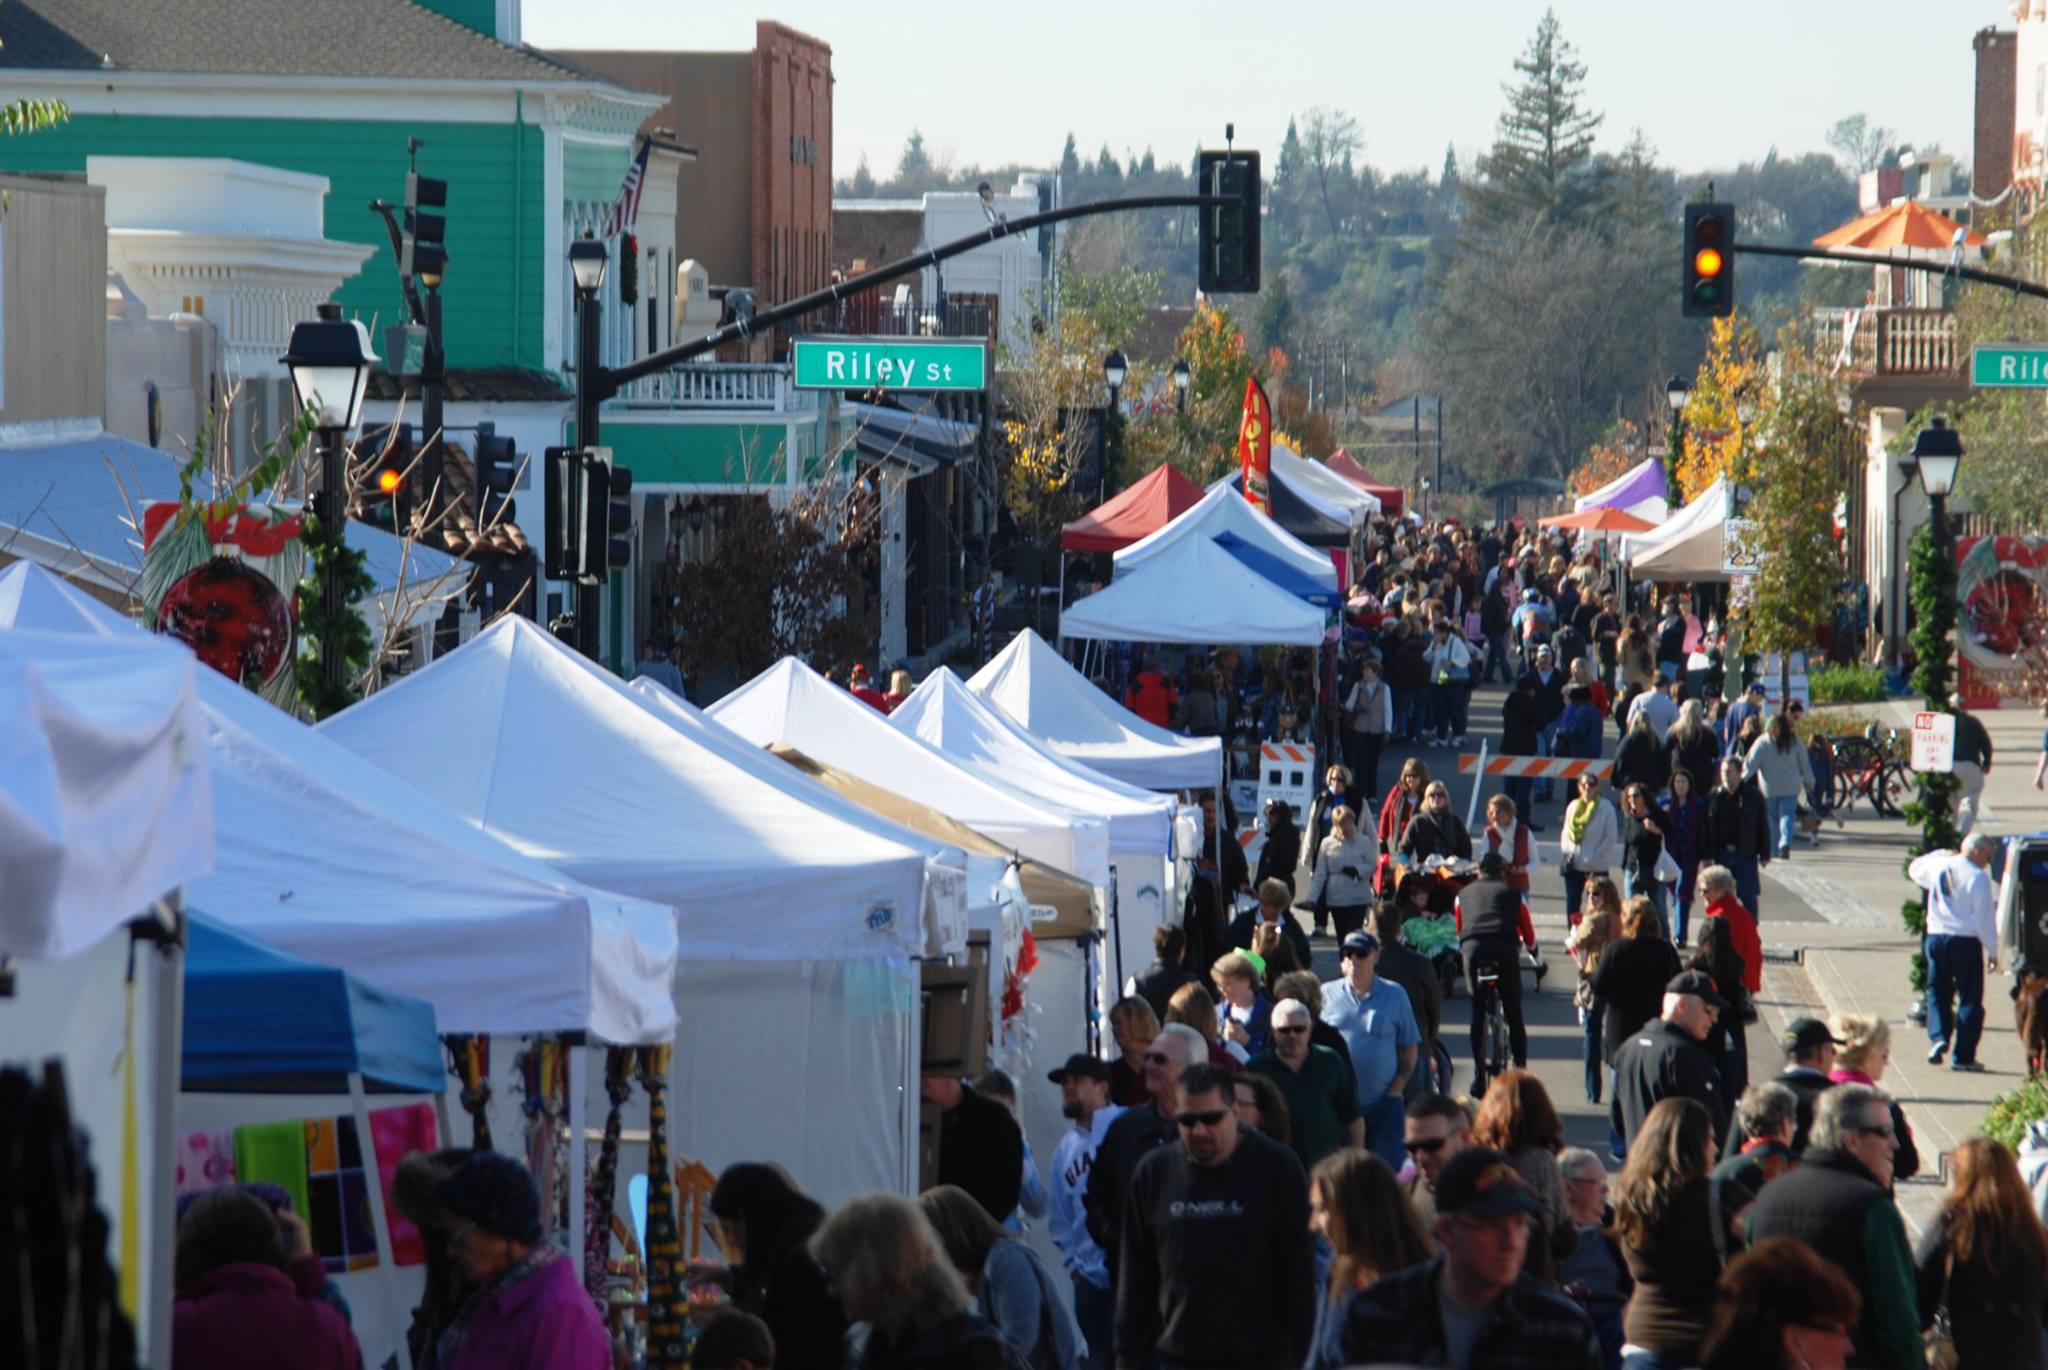 This Christmas Market In Northern California Is One Of The Best Around